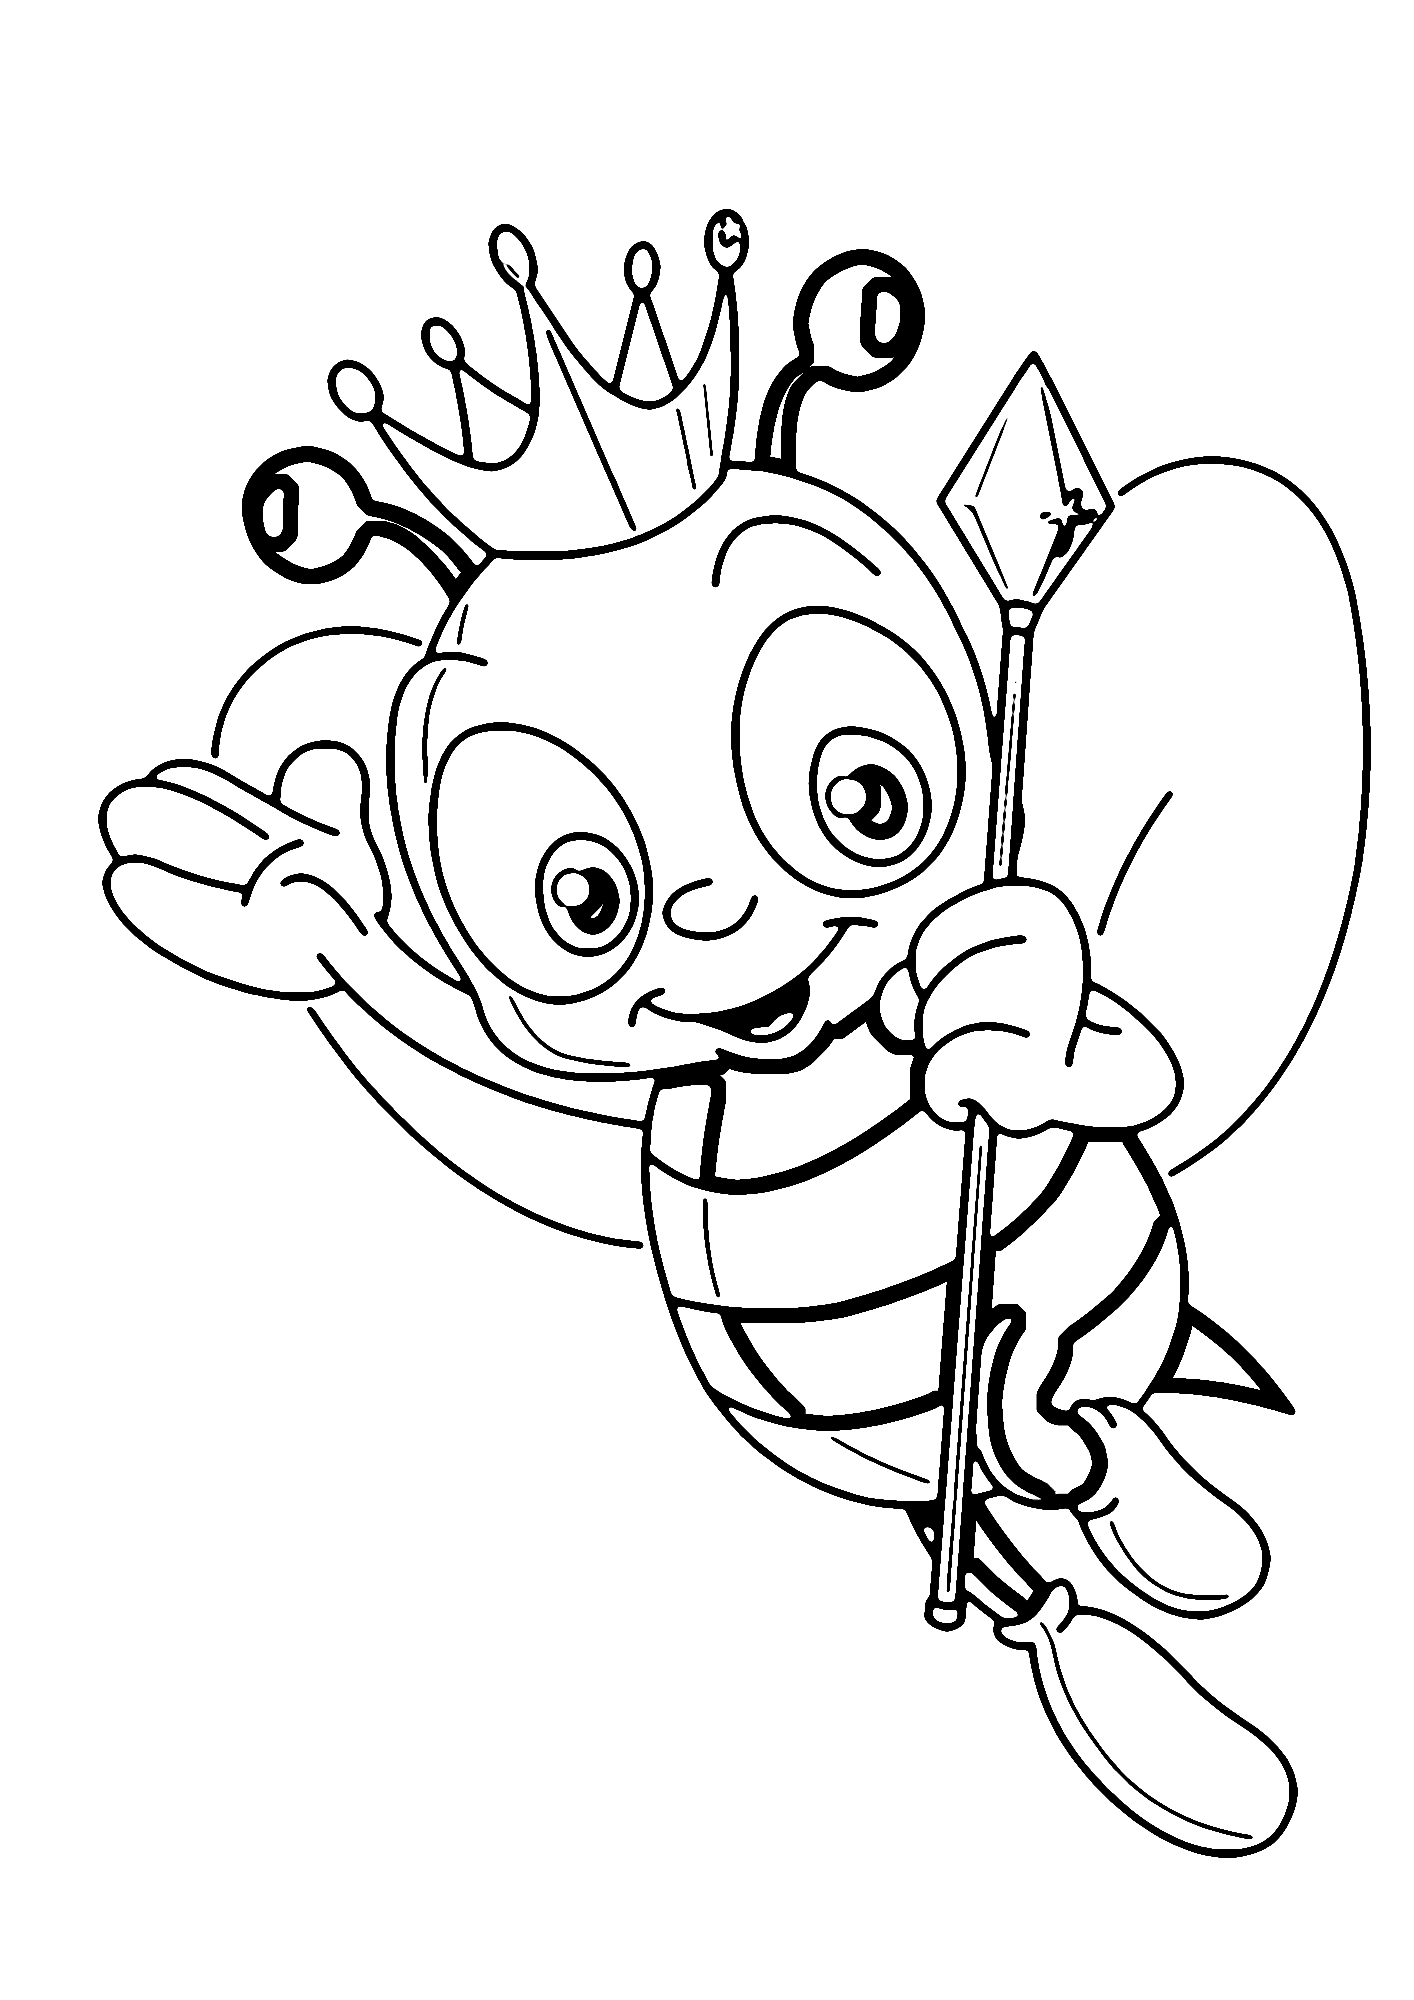 Queen Bee Coloring Page